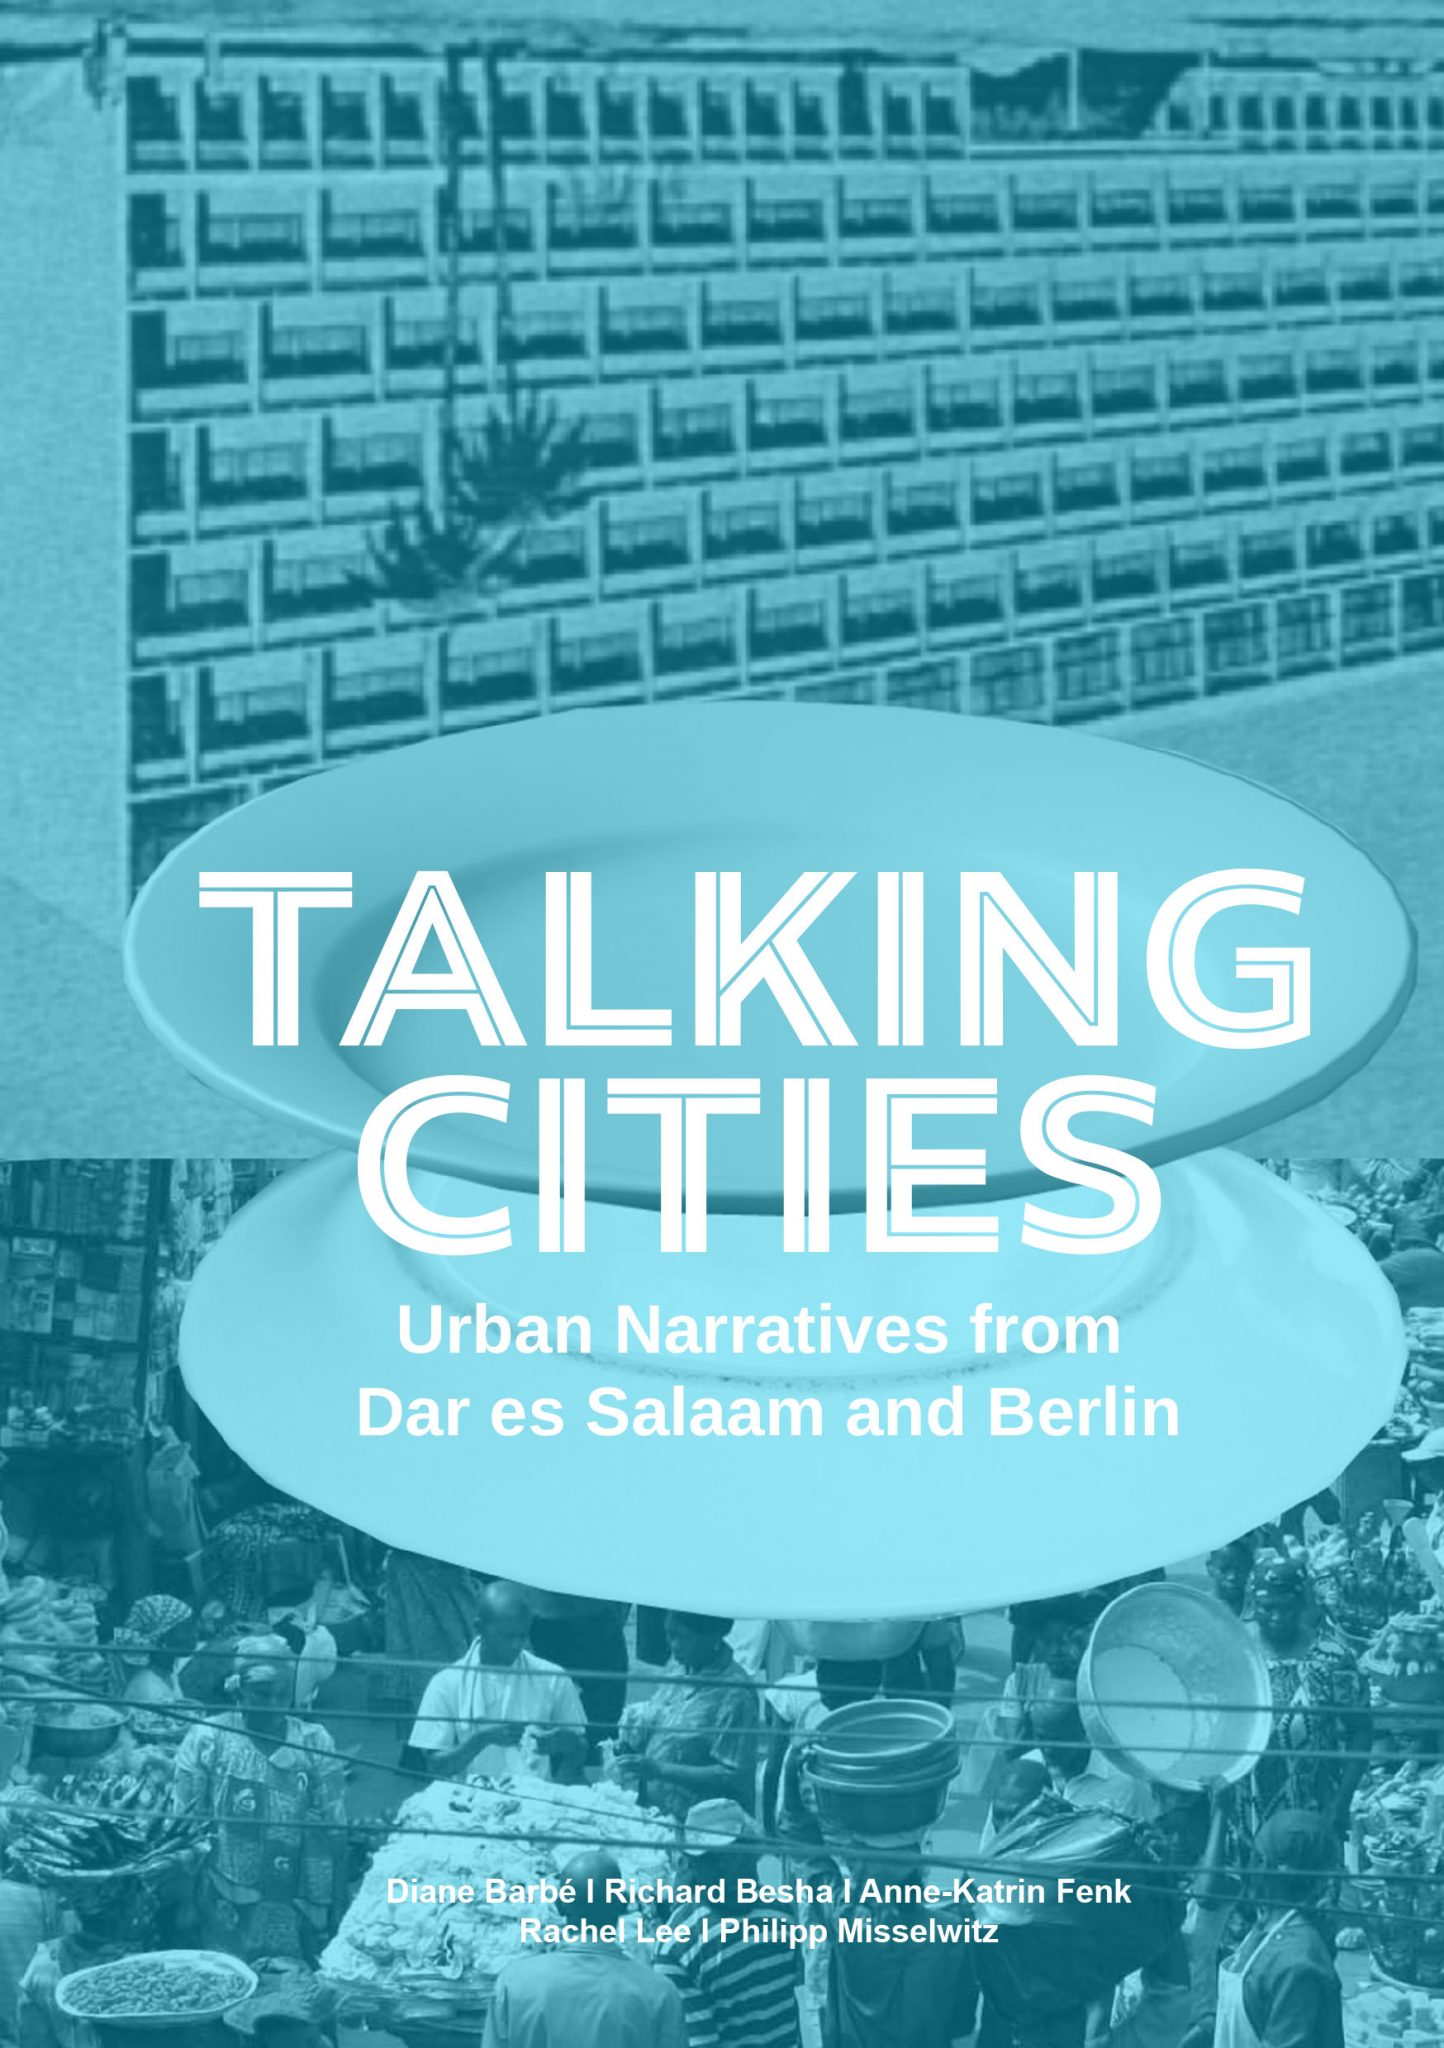 Talking Cities: Urban Narratives from Berlin and Dar es Salaam, out now!